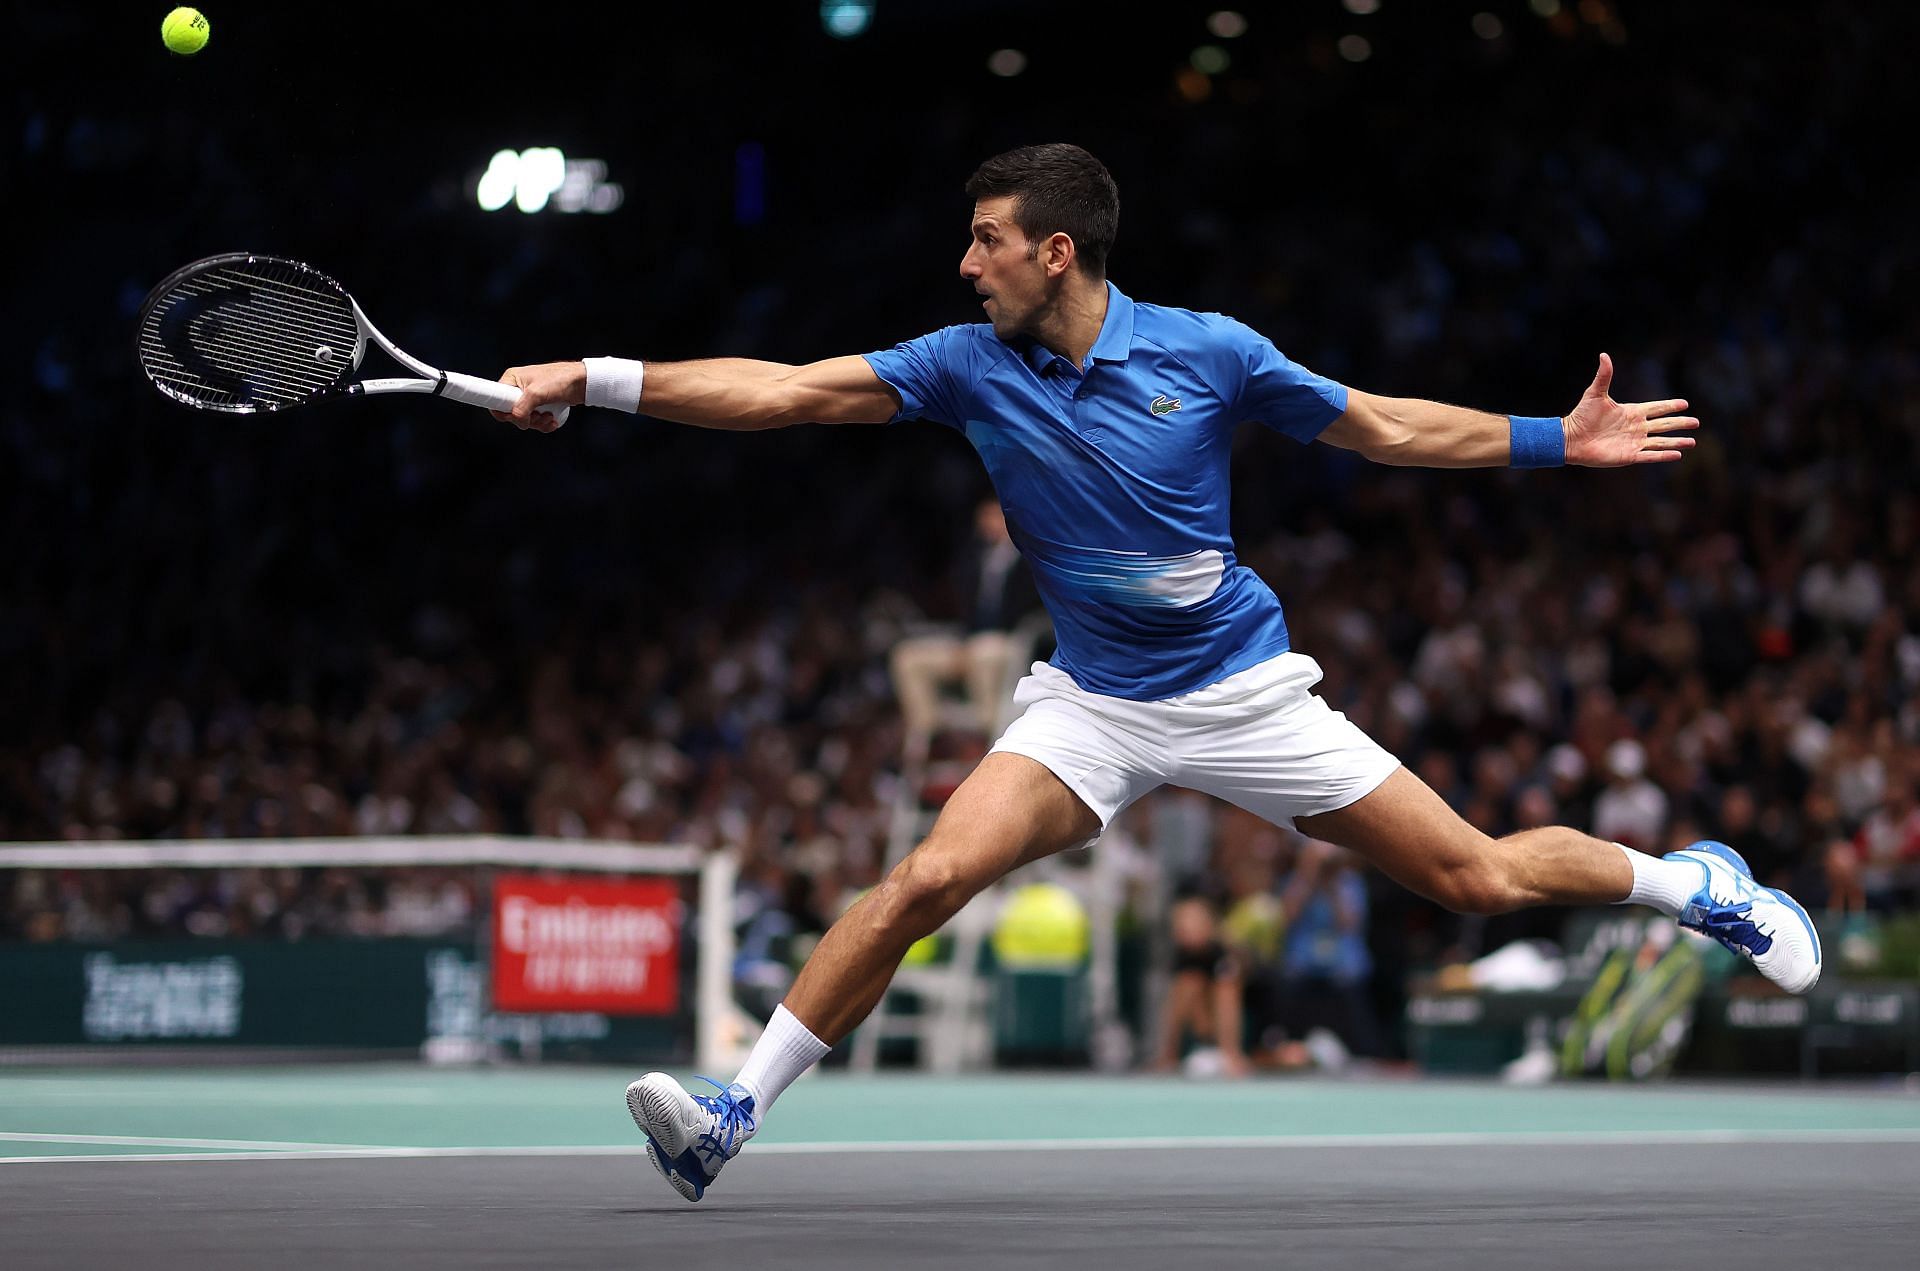 Djokovic will be eyeing a record-extending sixth ATP Finals title.